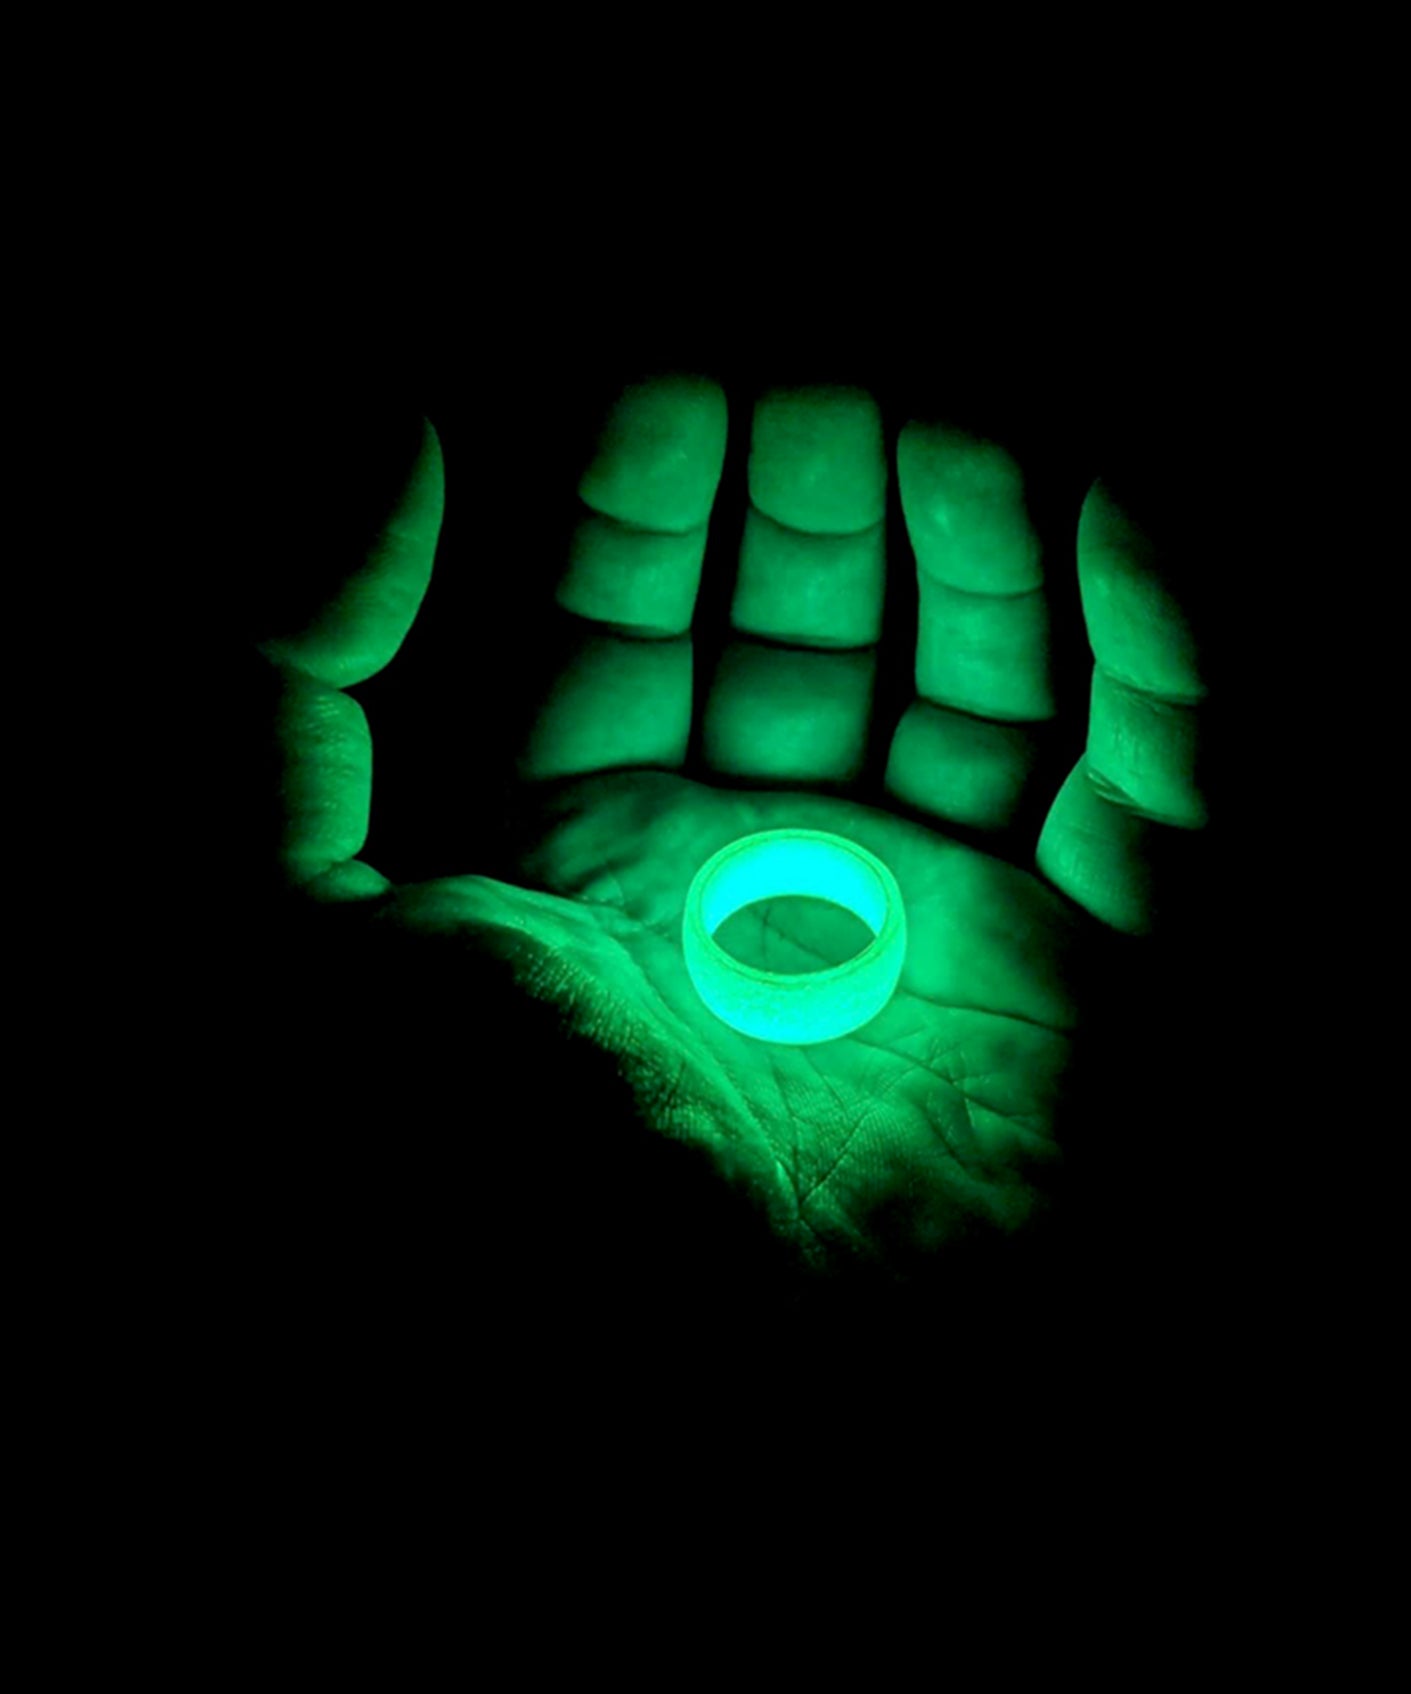 Buy Glow-in-the-Dark Ring Beads at S&S Worldwide